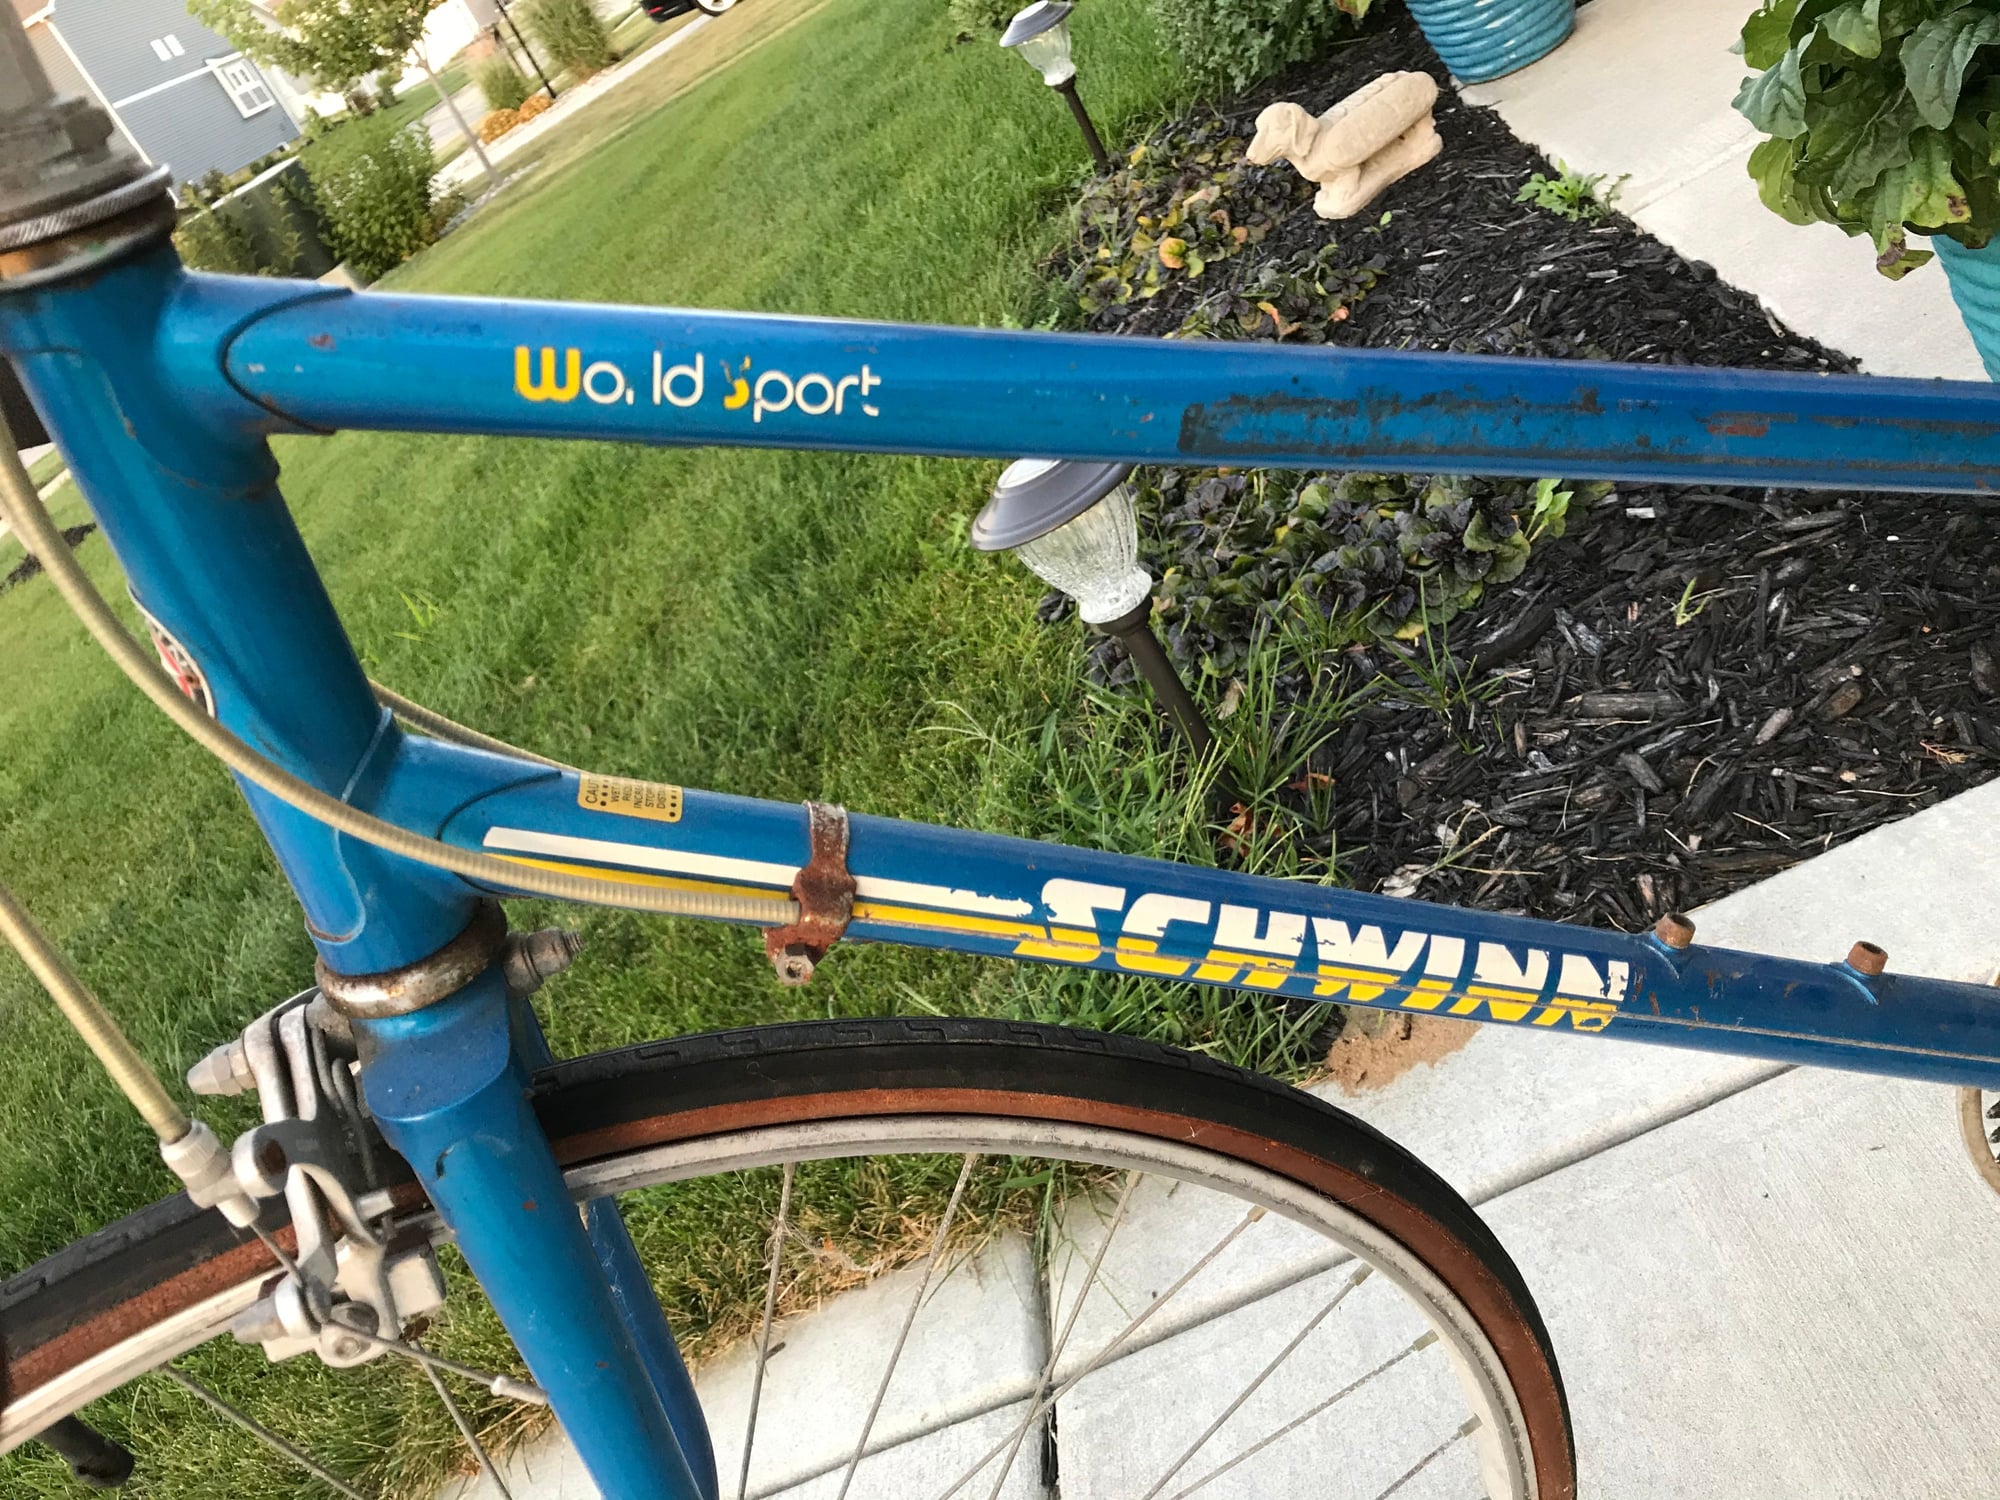 My $10 Vintage Schwinn find and I want to learn how to rebuild and